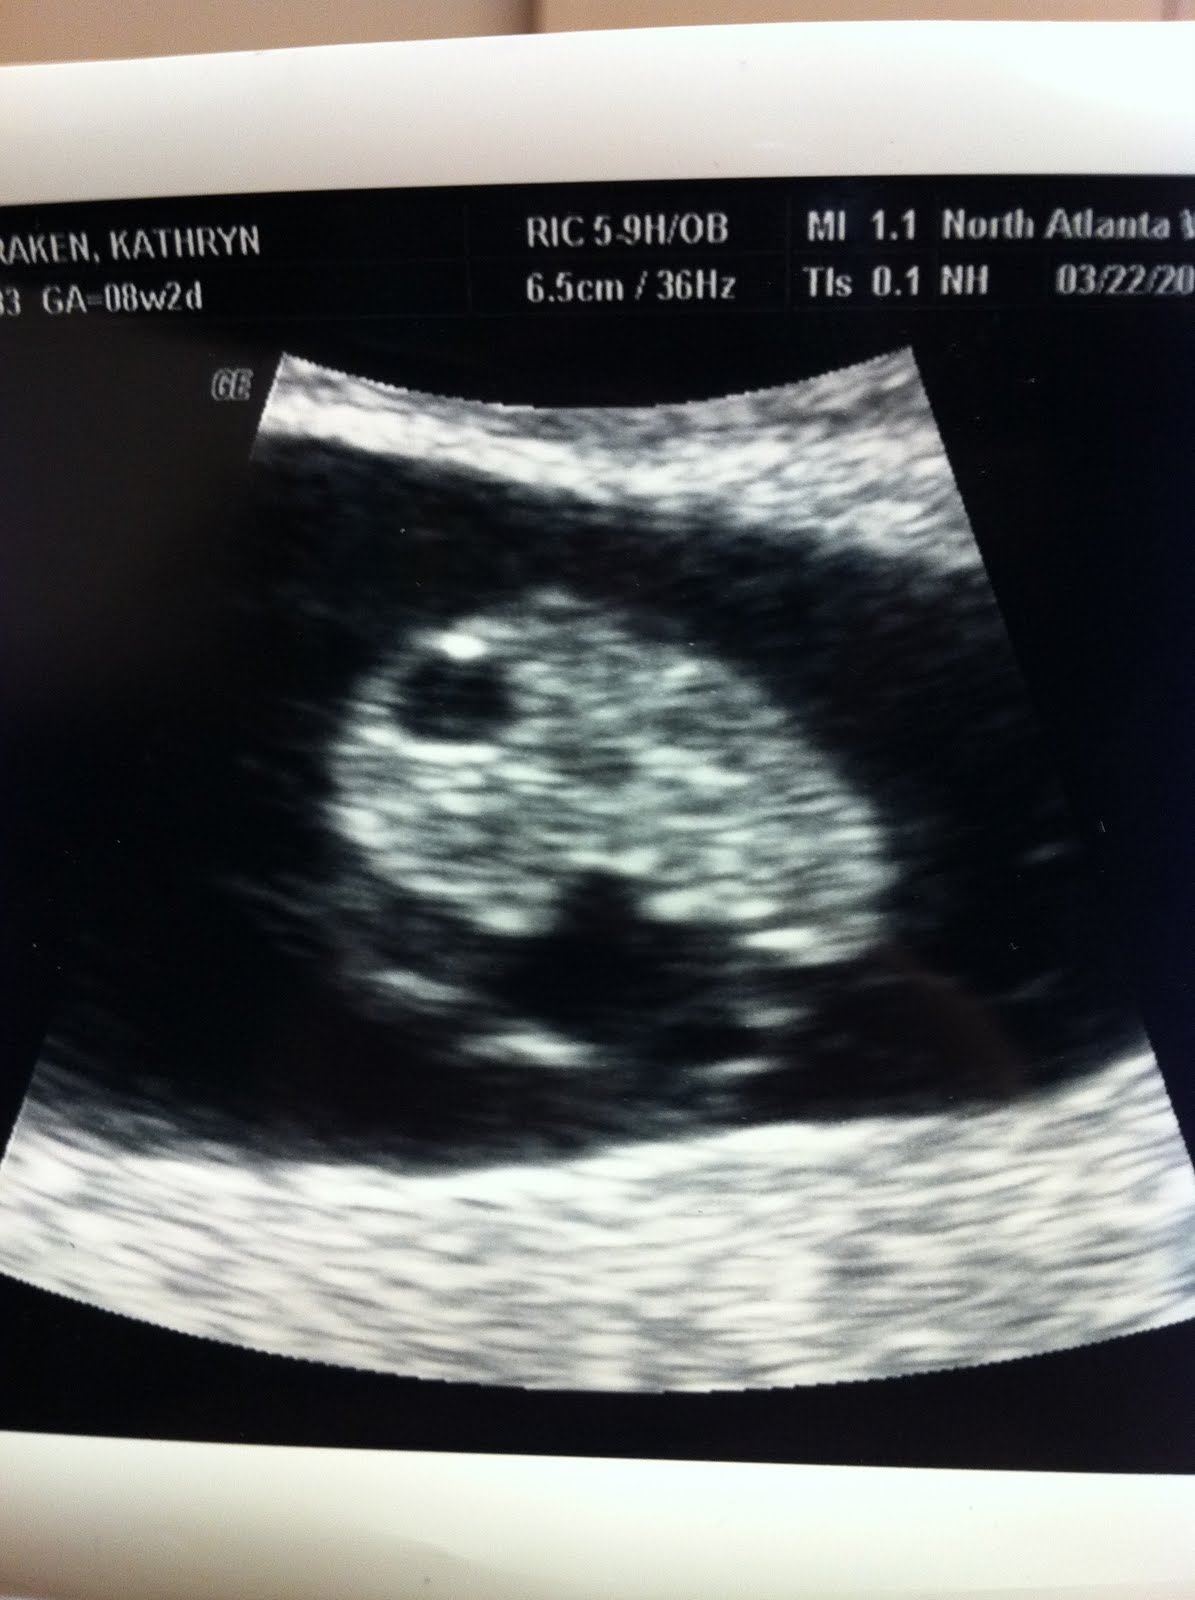 Healthy+heartbeat+at+11+weeks